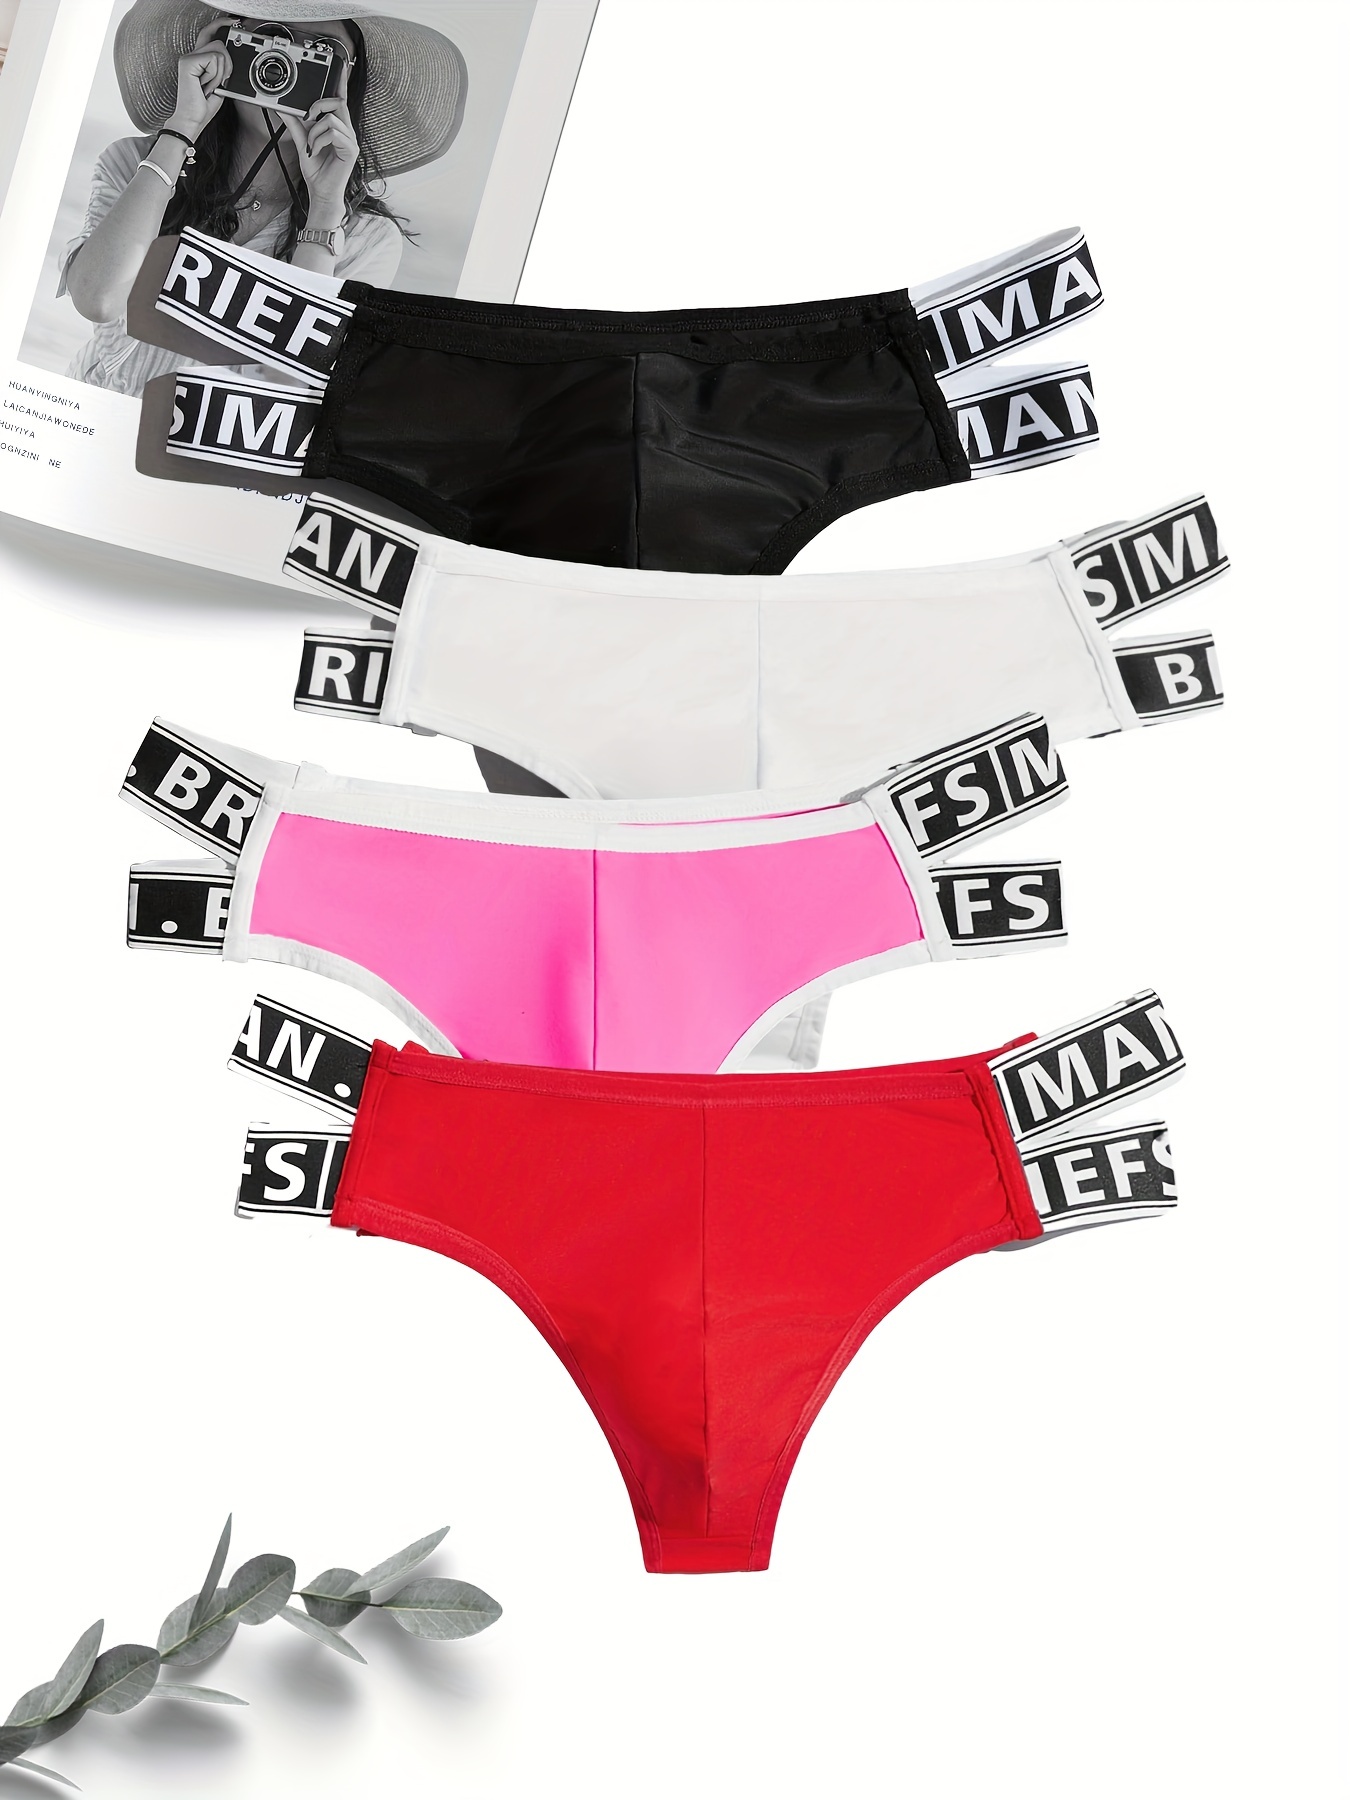 Buy Pink Cotton Cheekster Panty - Pink At 62% Off